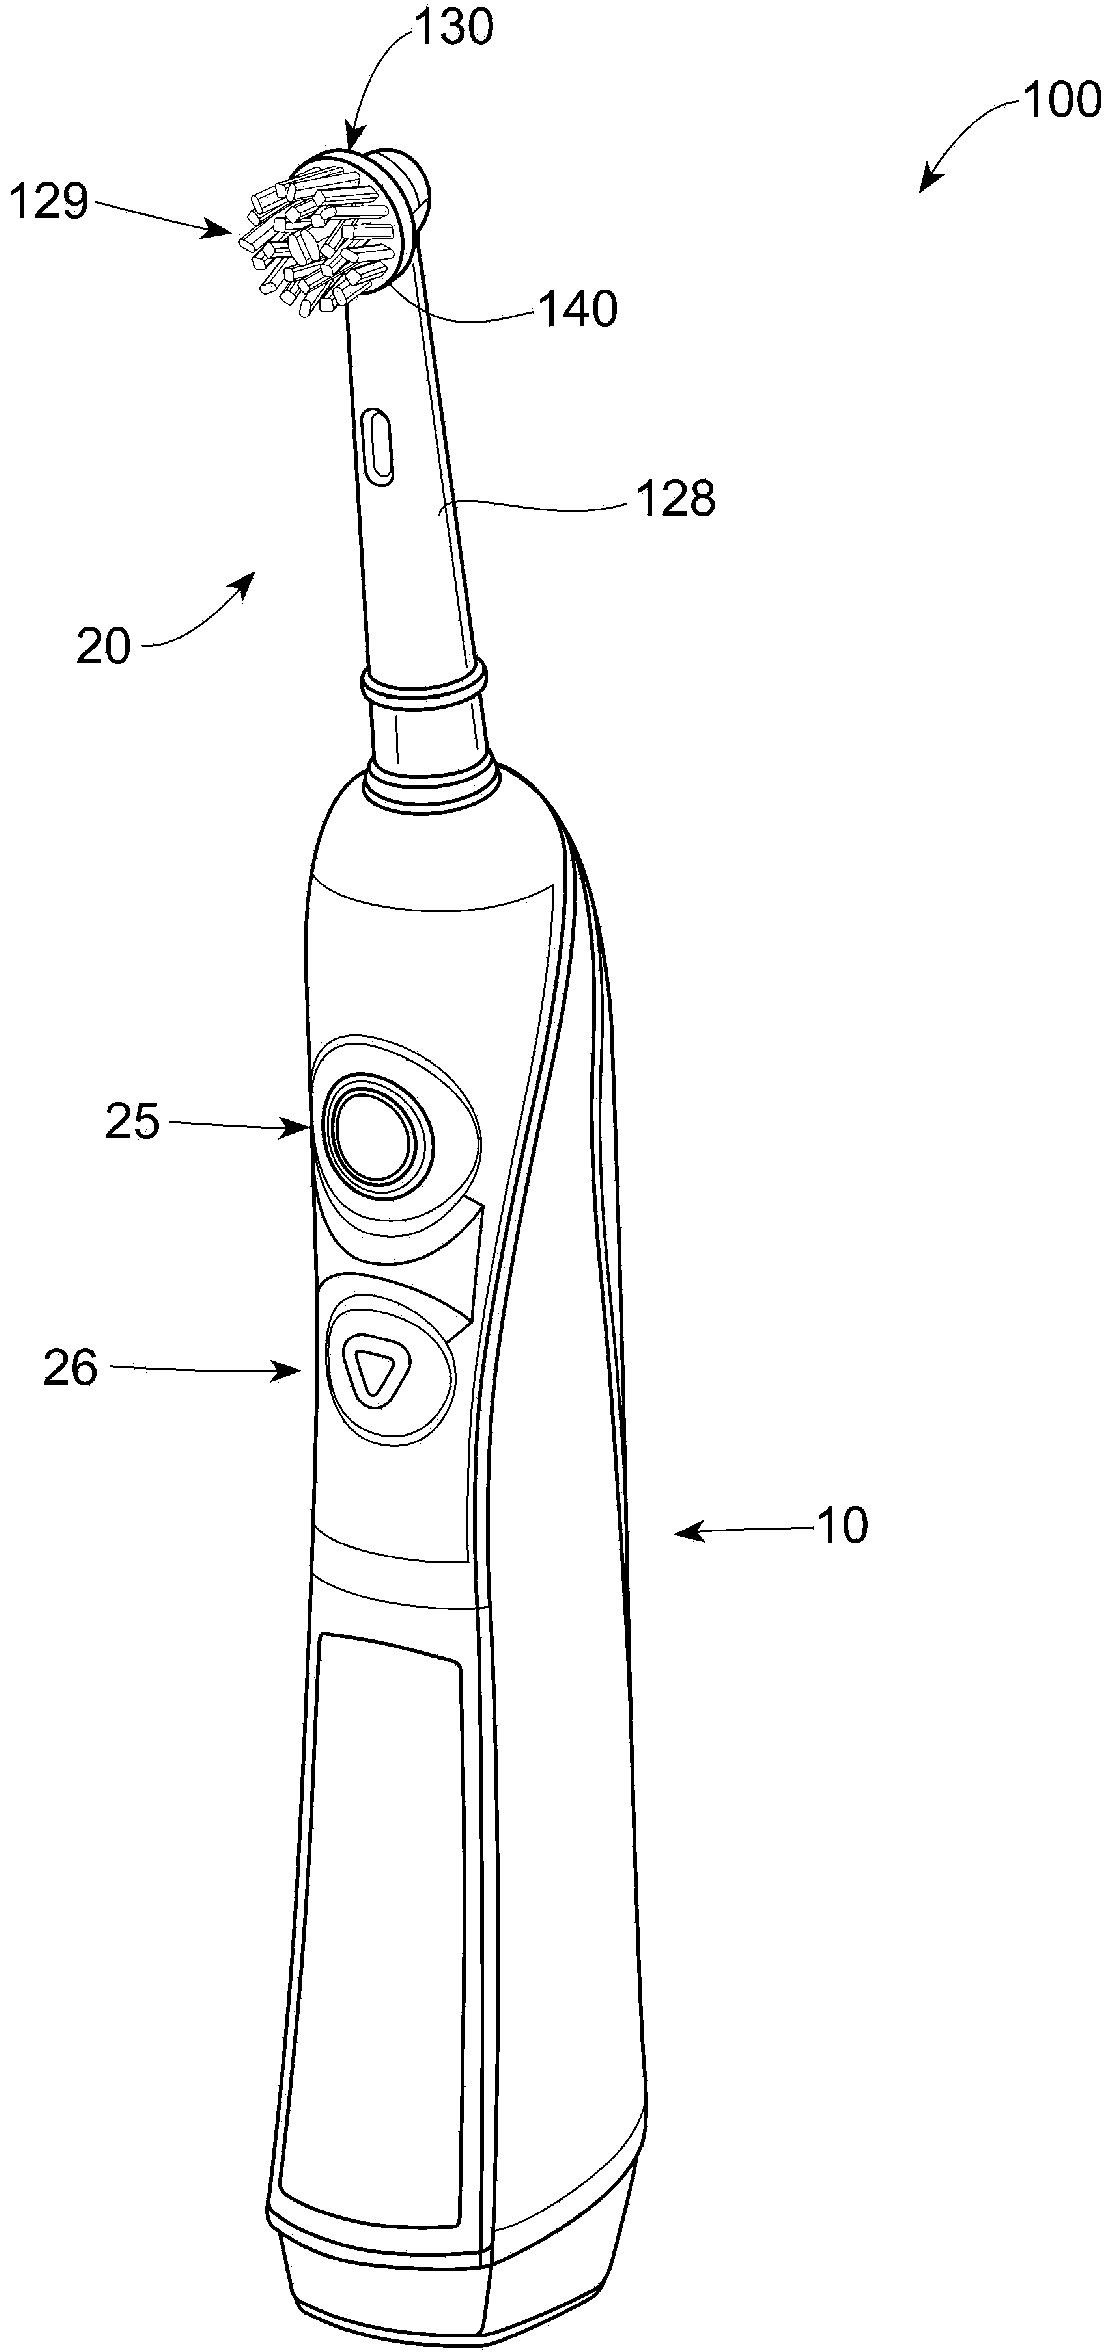 Oral health detection device